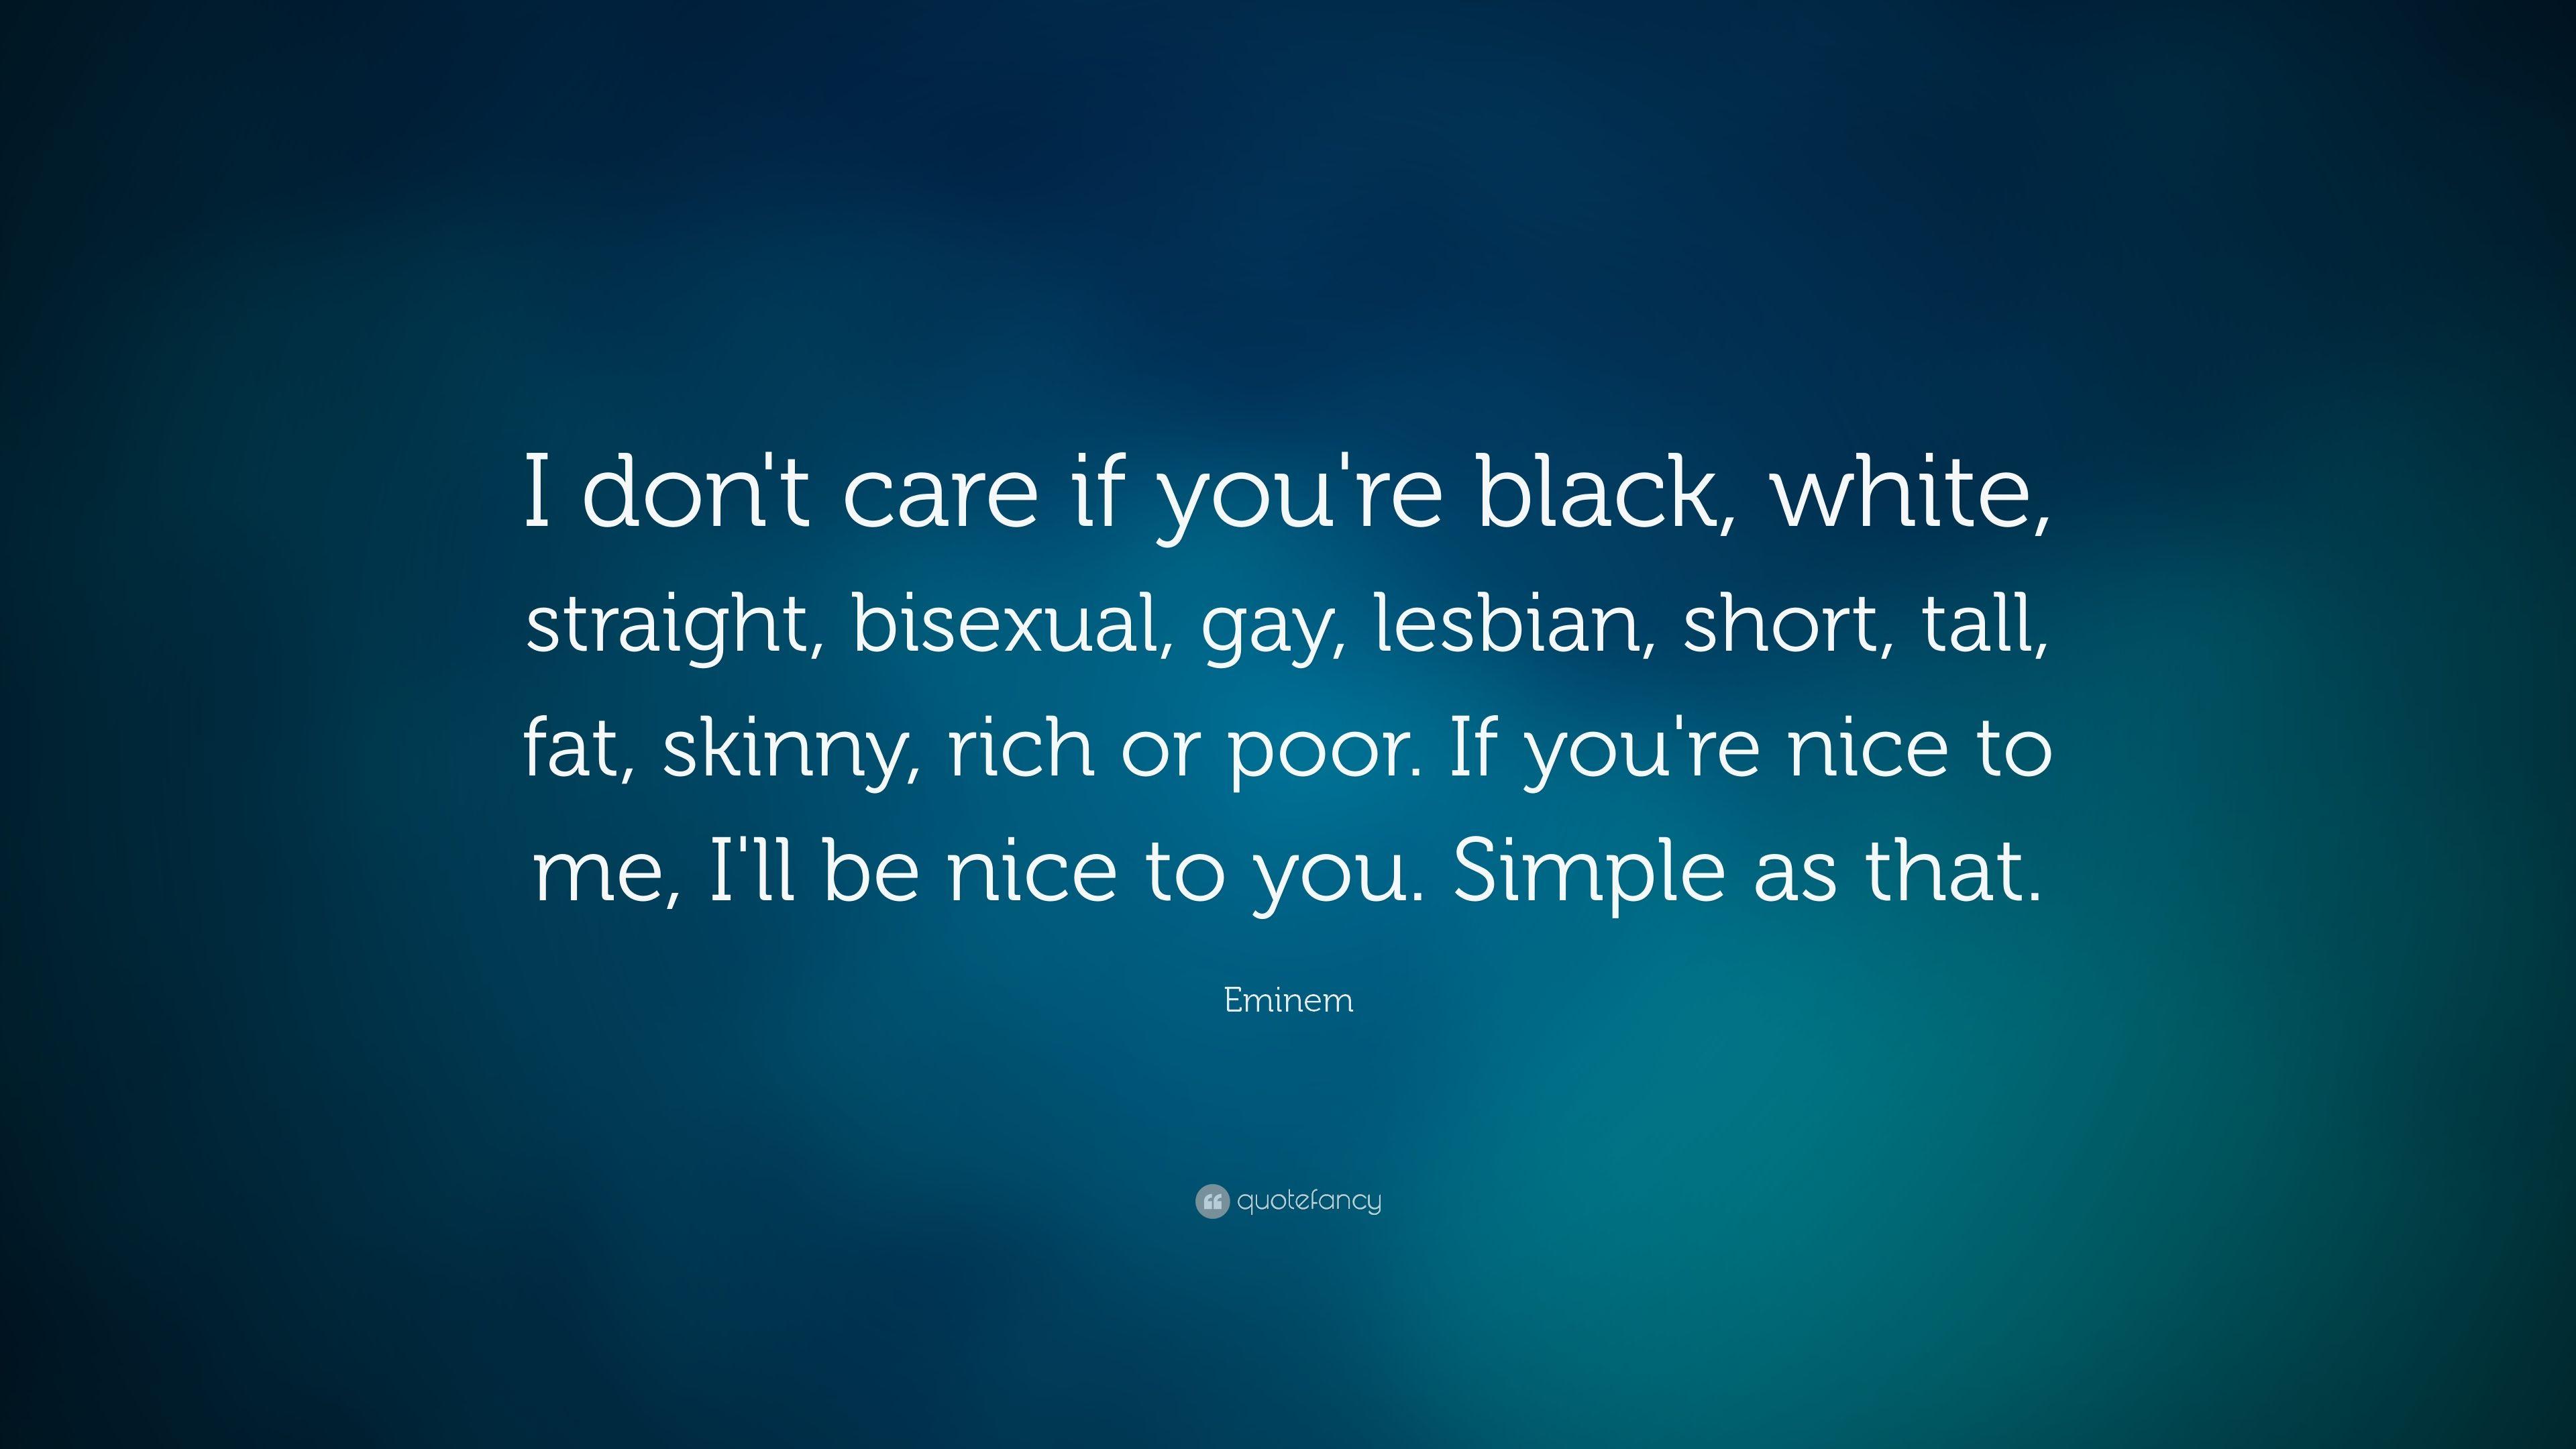 Eminem Quote: “I don't care if you're black, white, straight